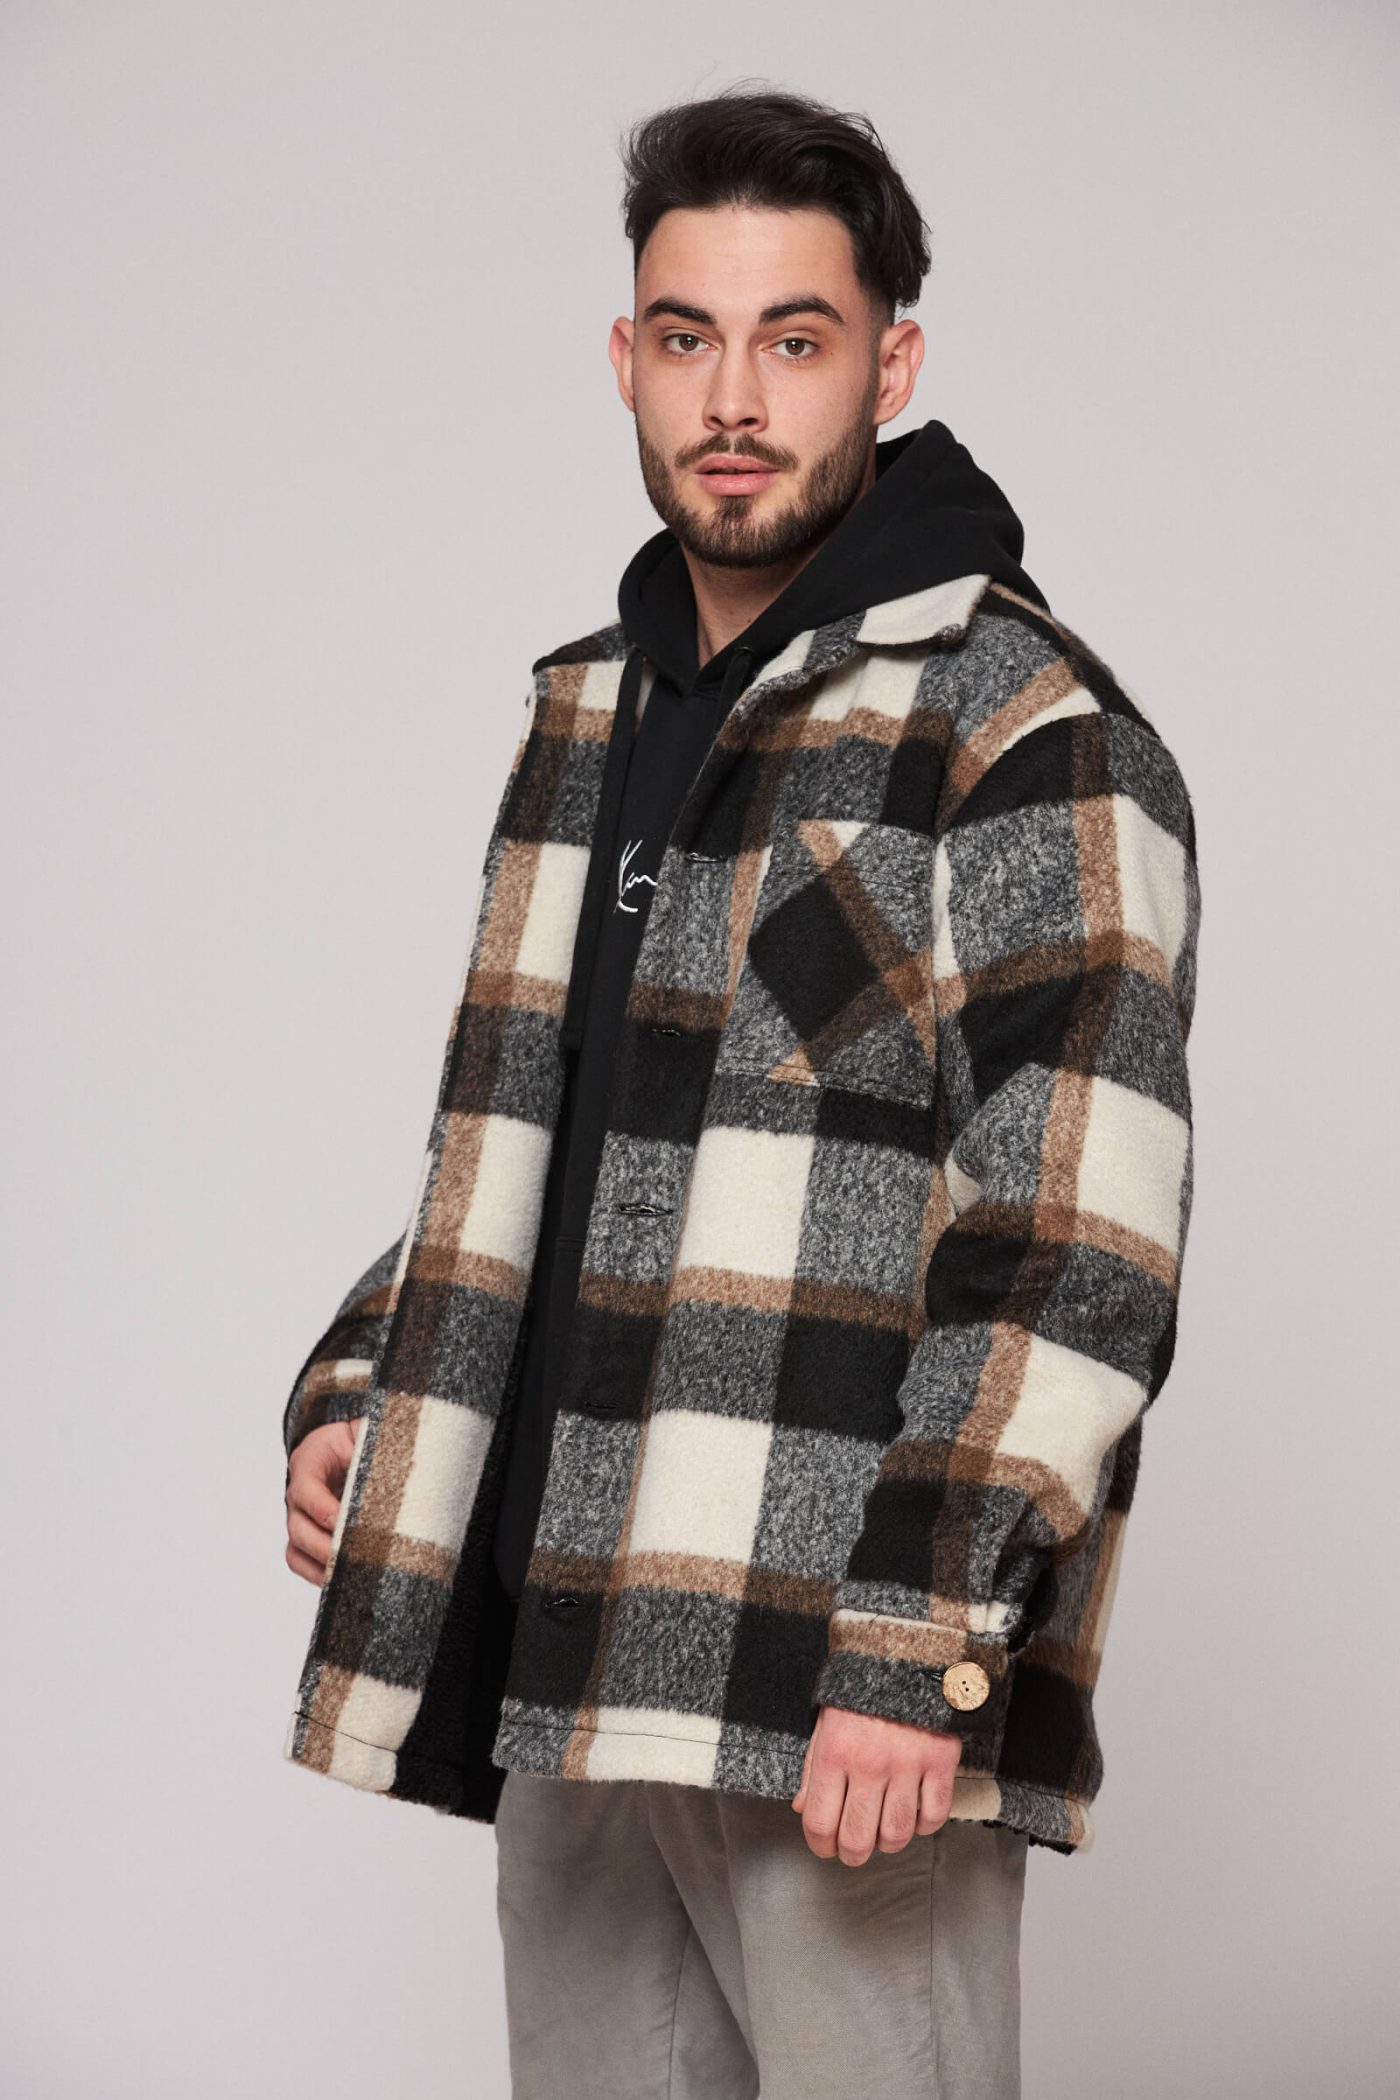 This season we decided to take things even more wild with our men aesthetics going full lumberjack. You can almost smell the crispy cold wind and hear the fire in tha back of a wooden cabin, can't you? Nothing says manly better than a well suited plaid jacket. Bring on the hunting!